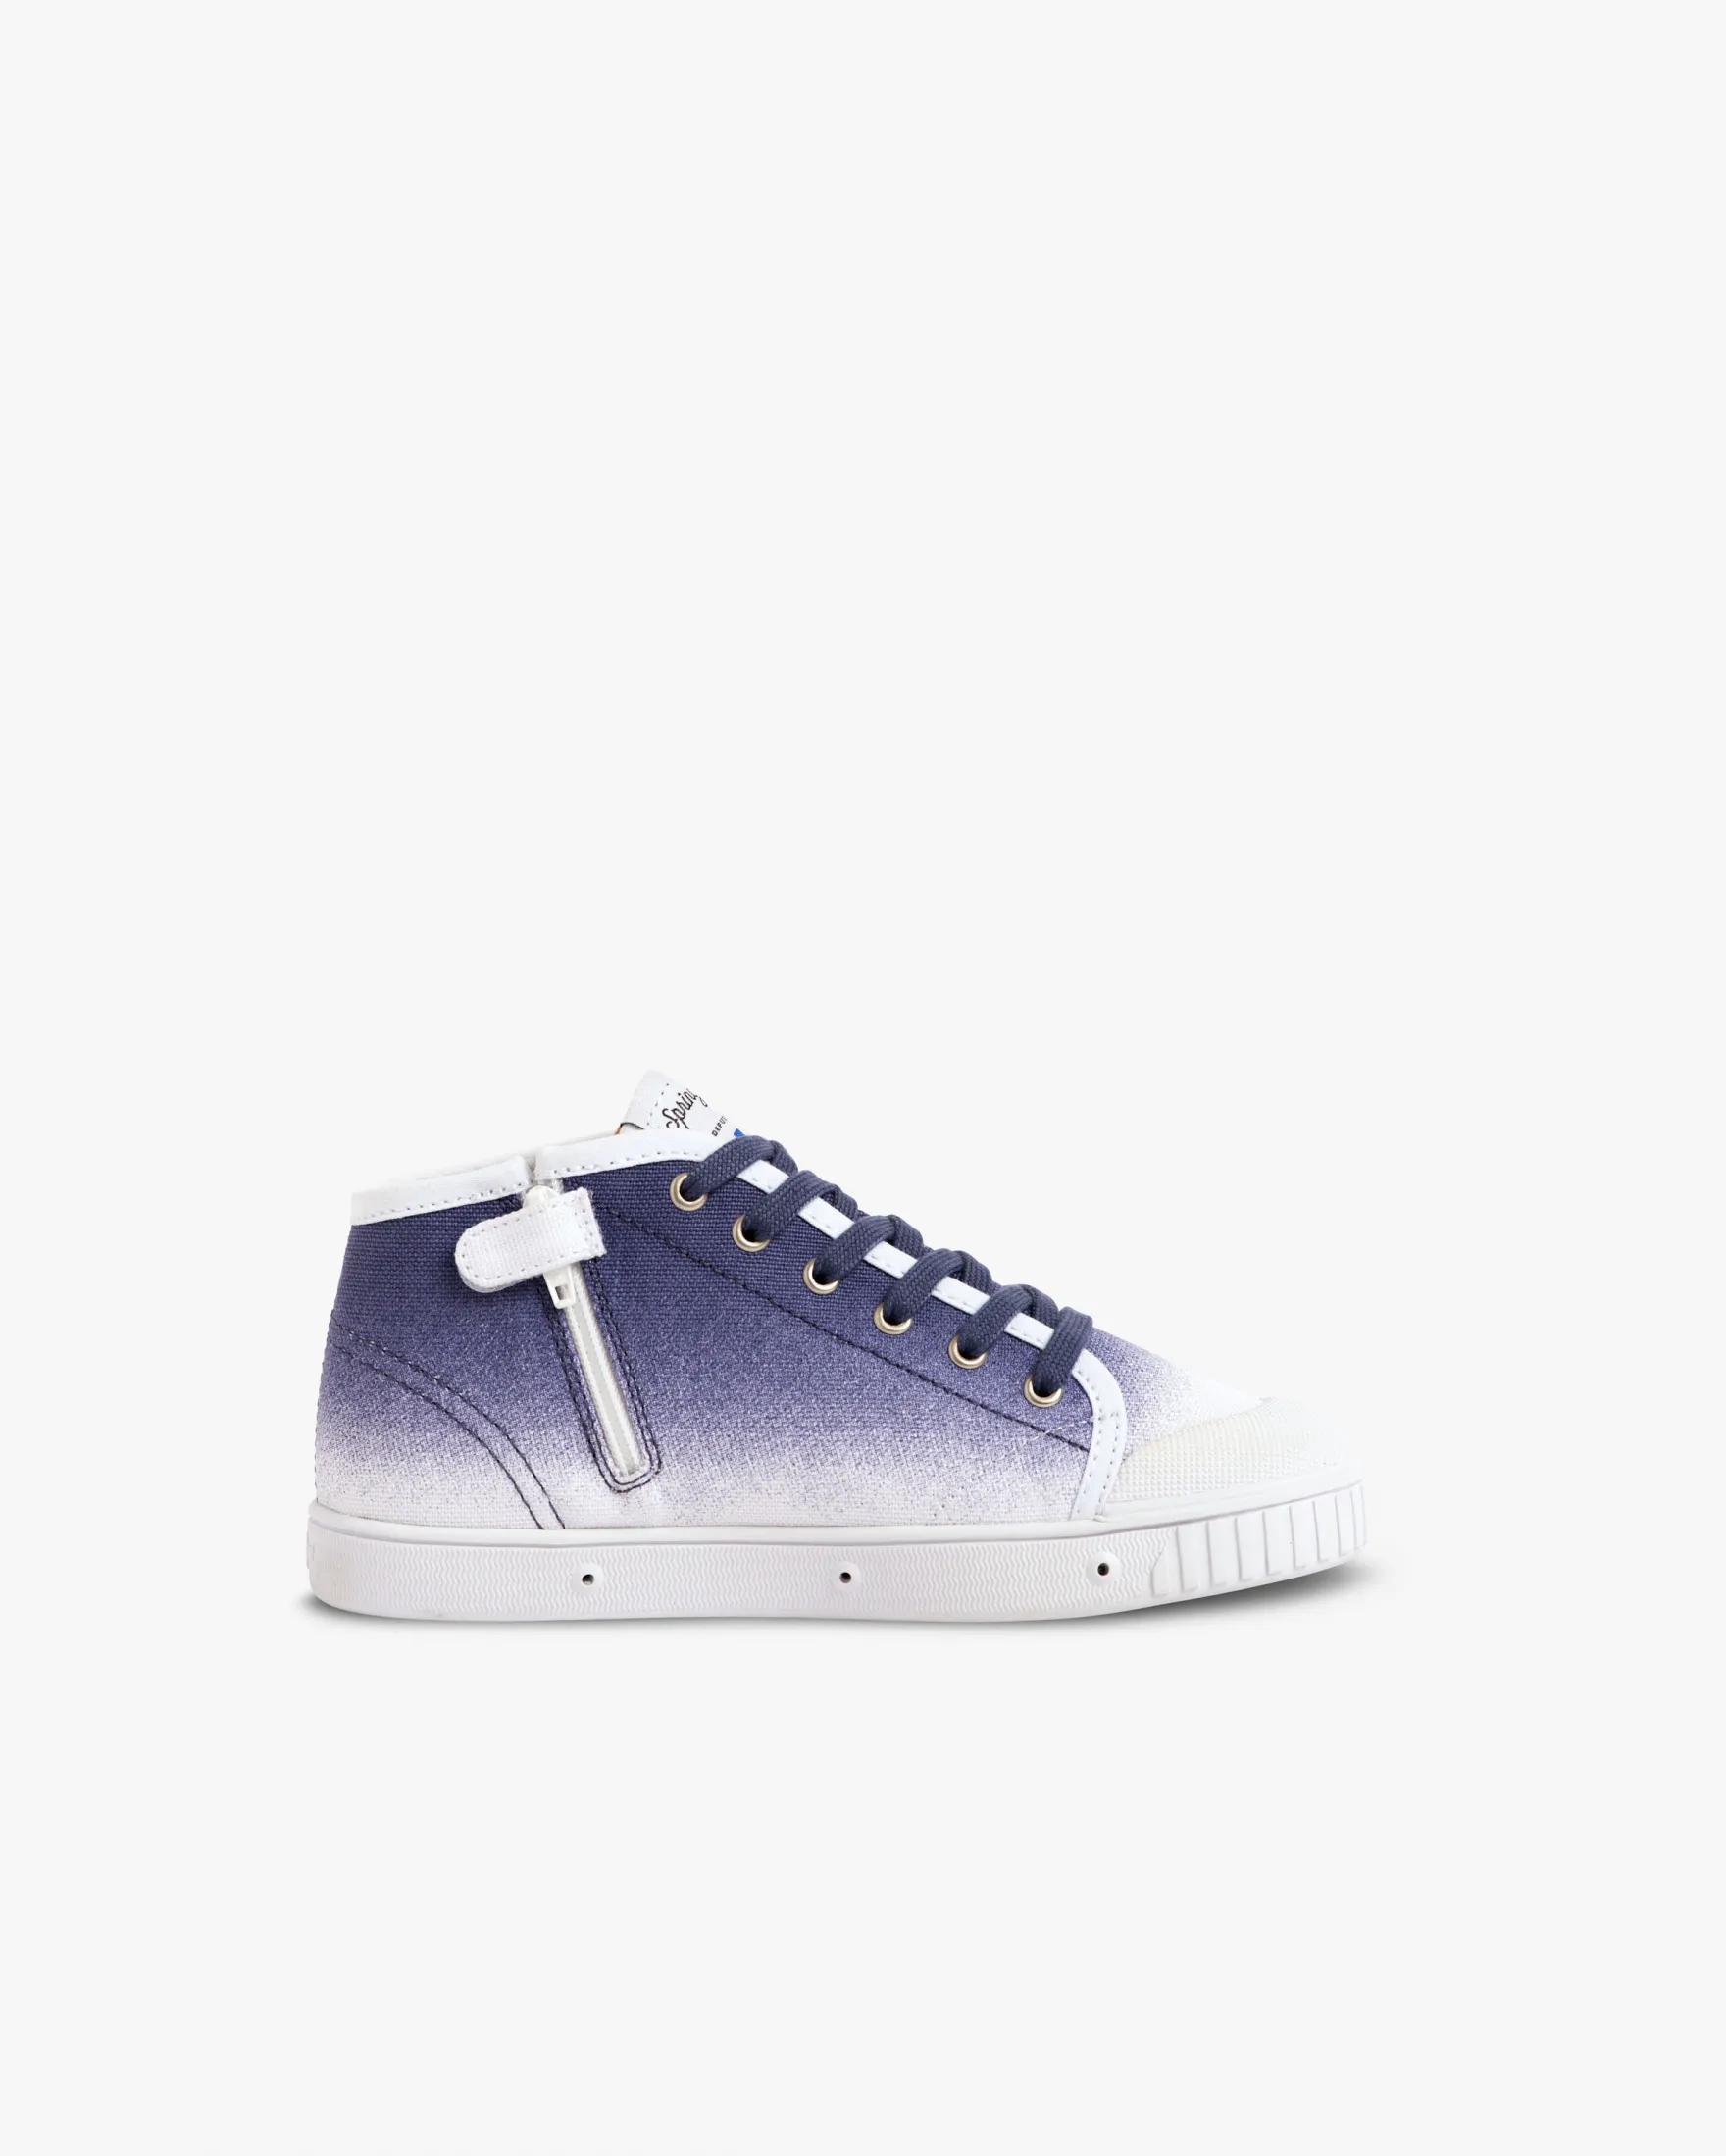 Children's blue high top trainers